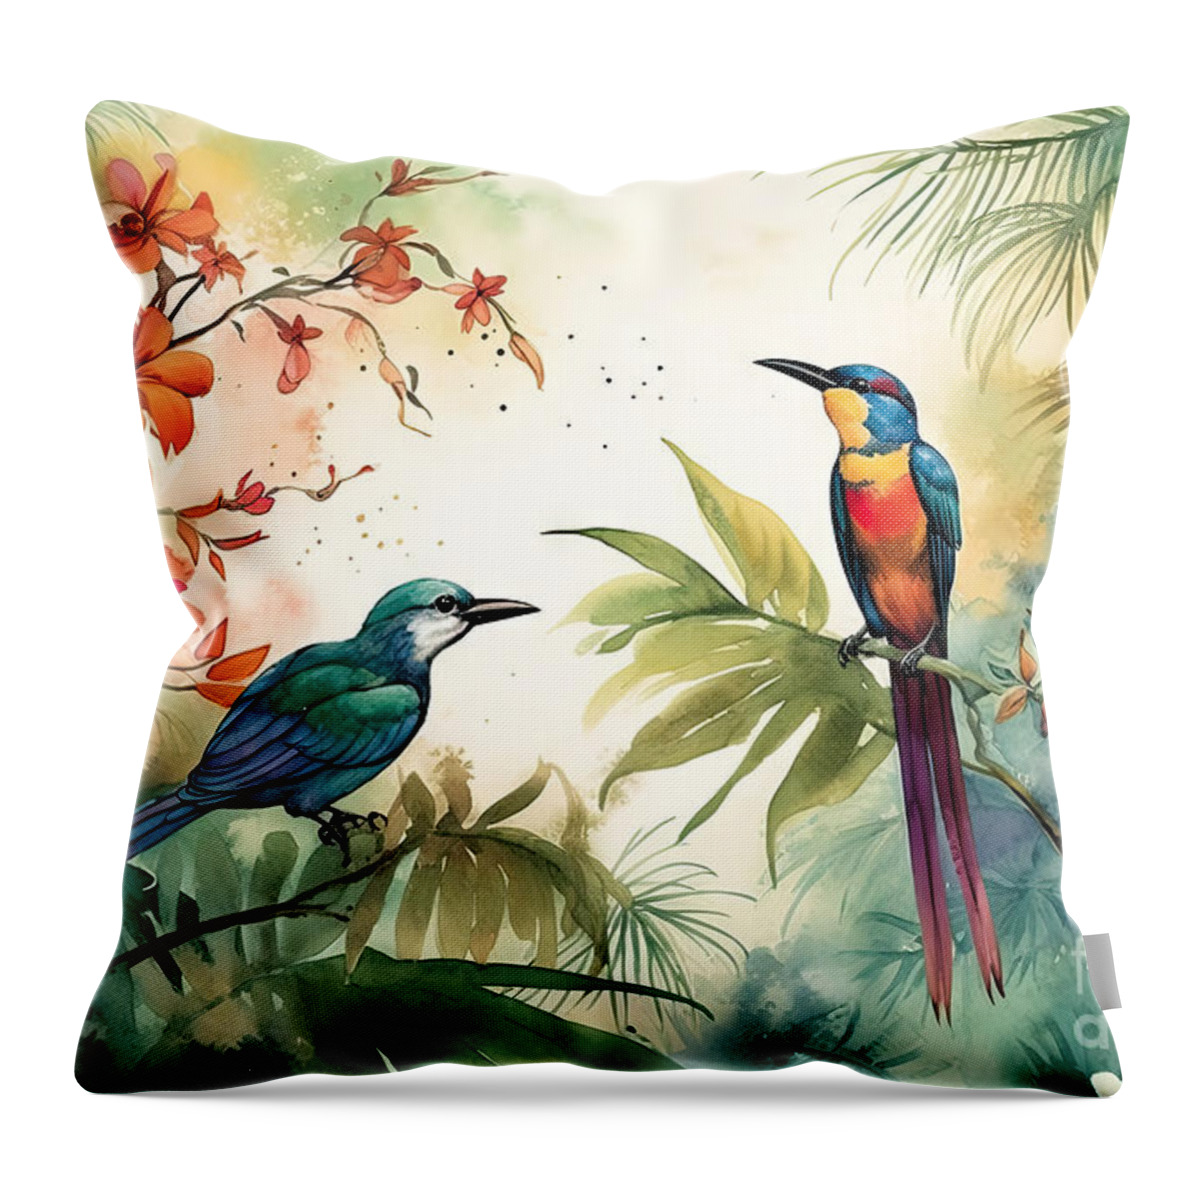 Watercolor Throw Pillow featuring the painting Watercolor tropical scene with leaves. flowers, and birds. by N Akkash